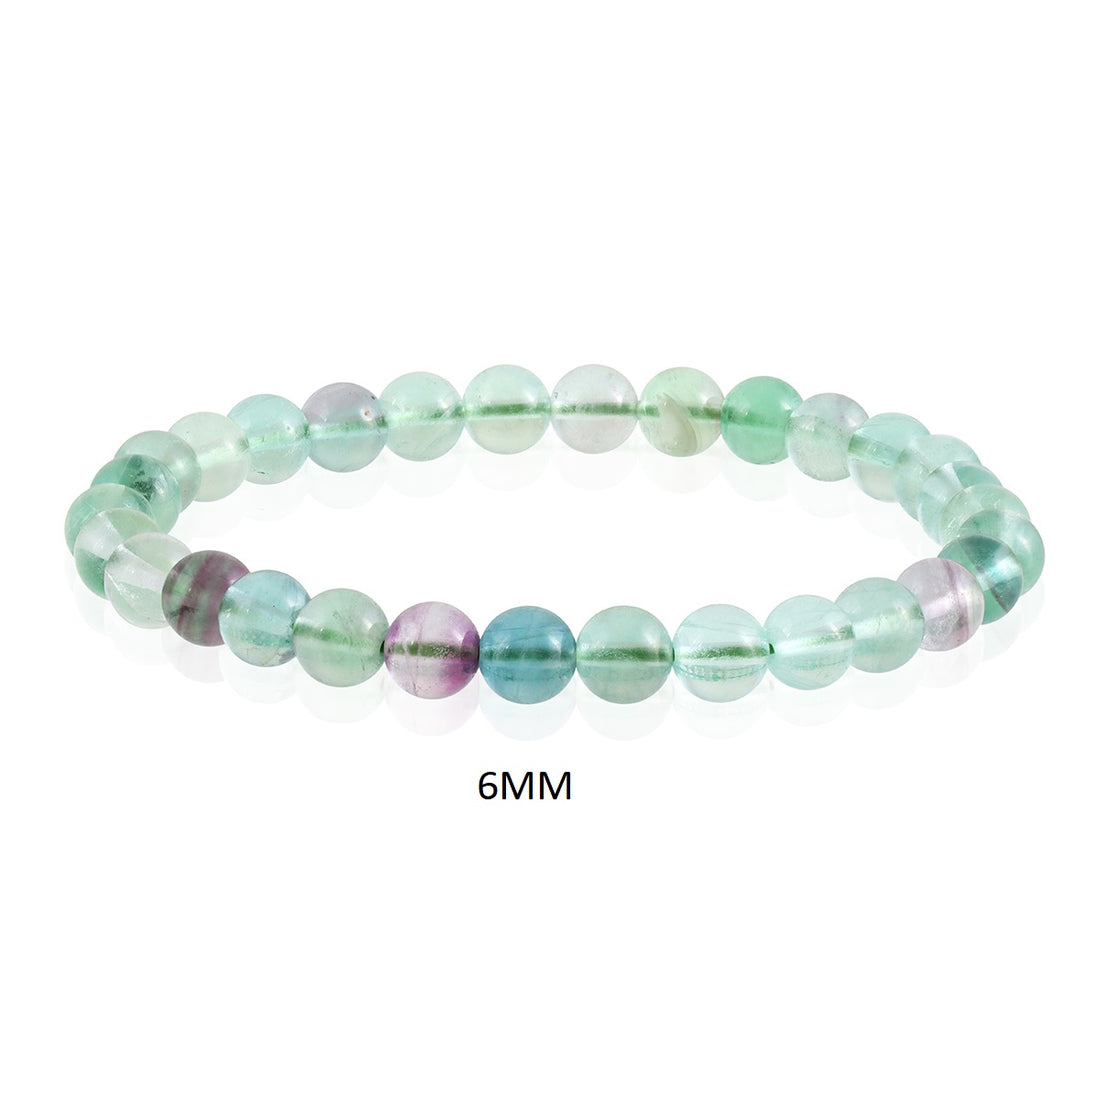 Artistic representation symbolizing focus, featuring the Fluorite Stretch Bracelet as a conduit for mental clarity and concentration